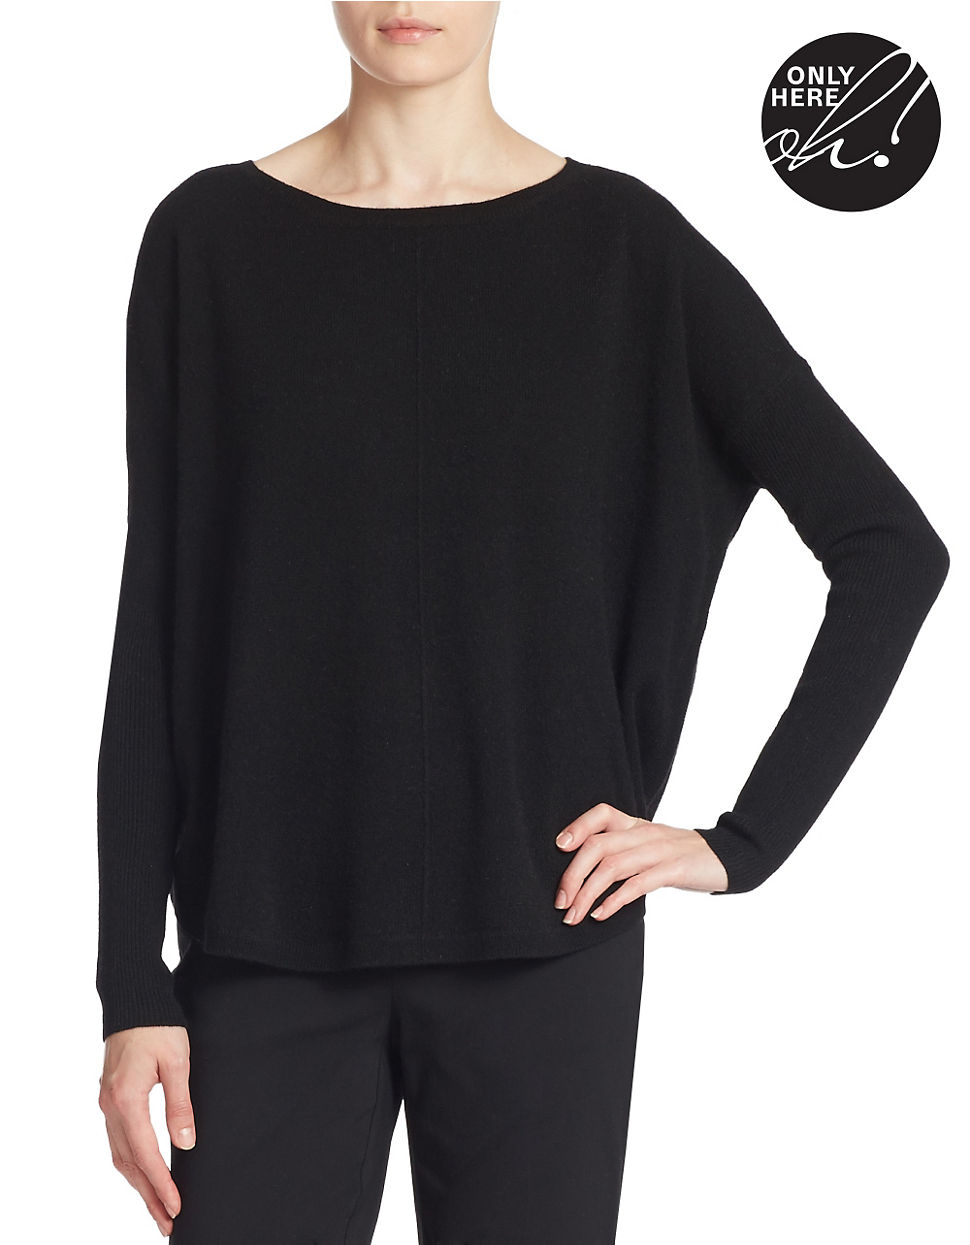 Lord & taylor Plus Curved Hem Cashmere Sweater in Black | Lyst